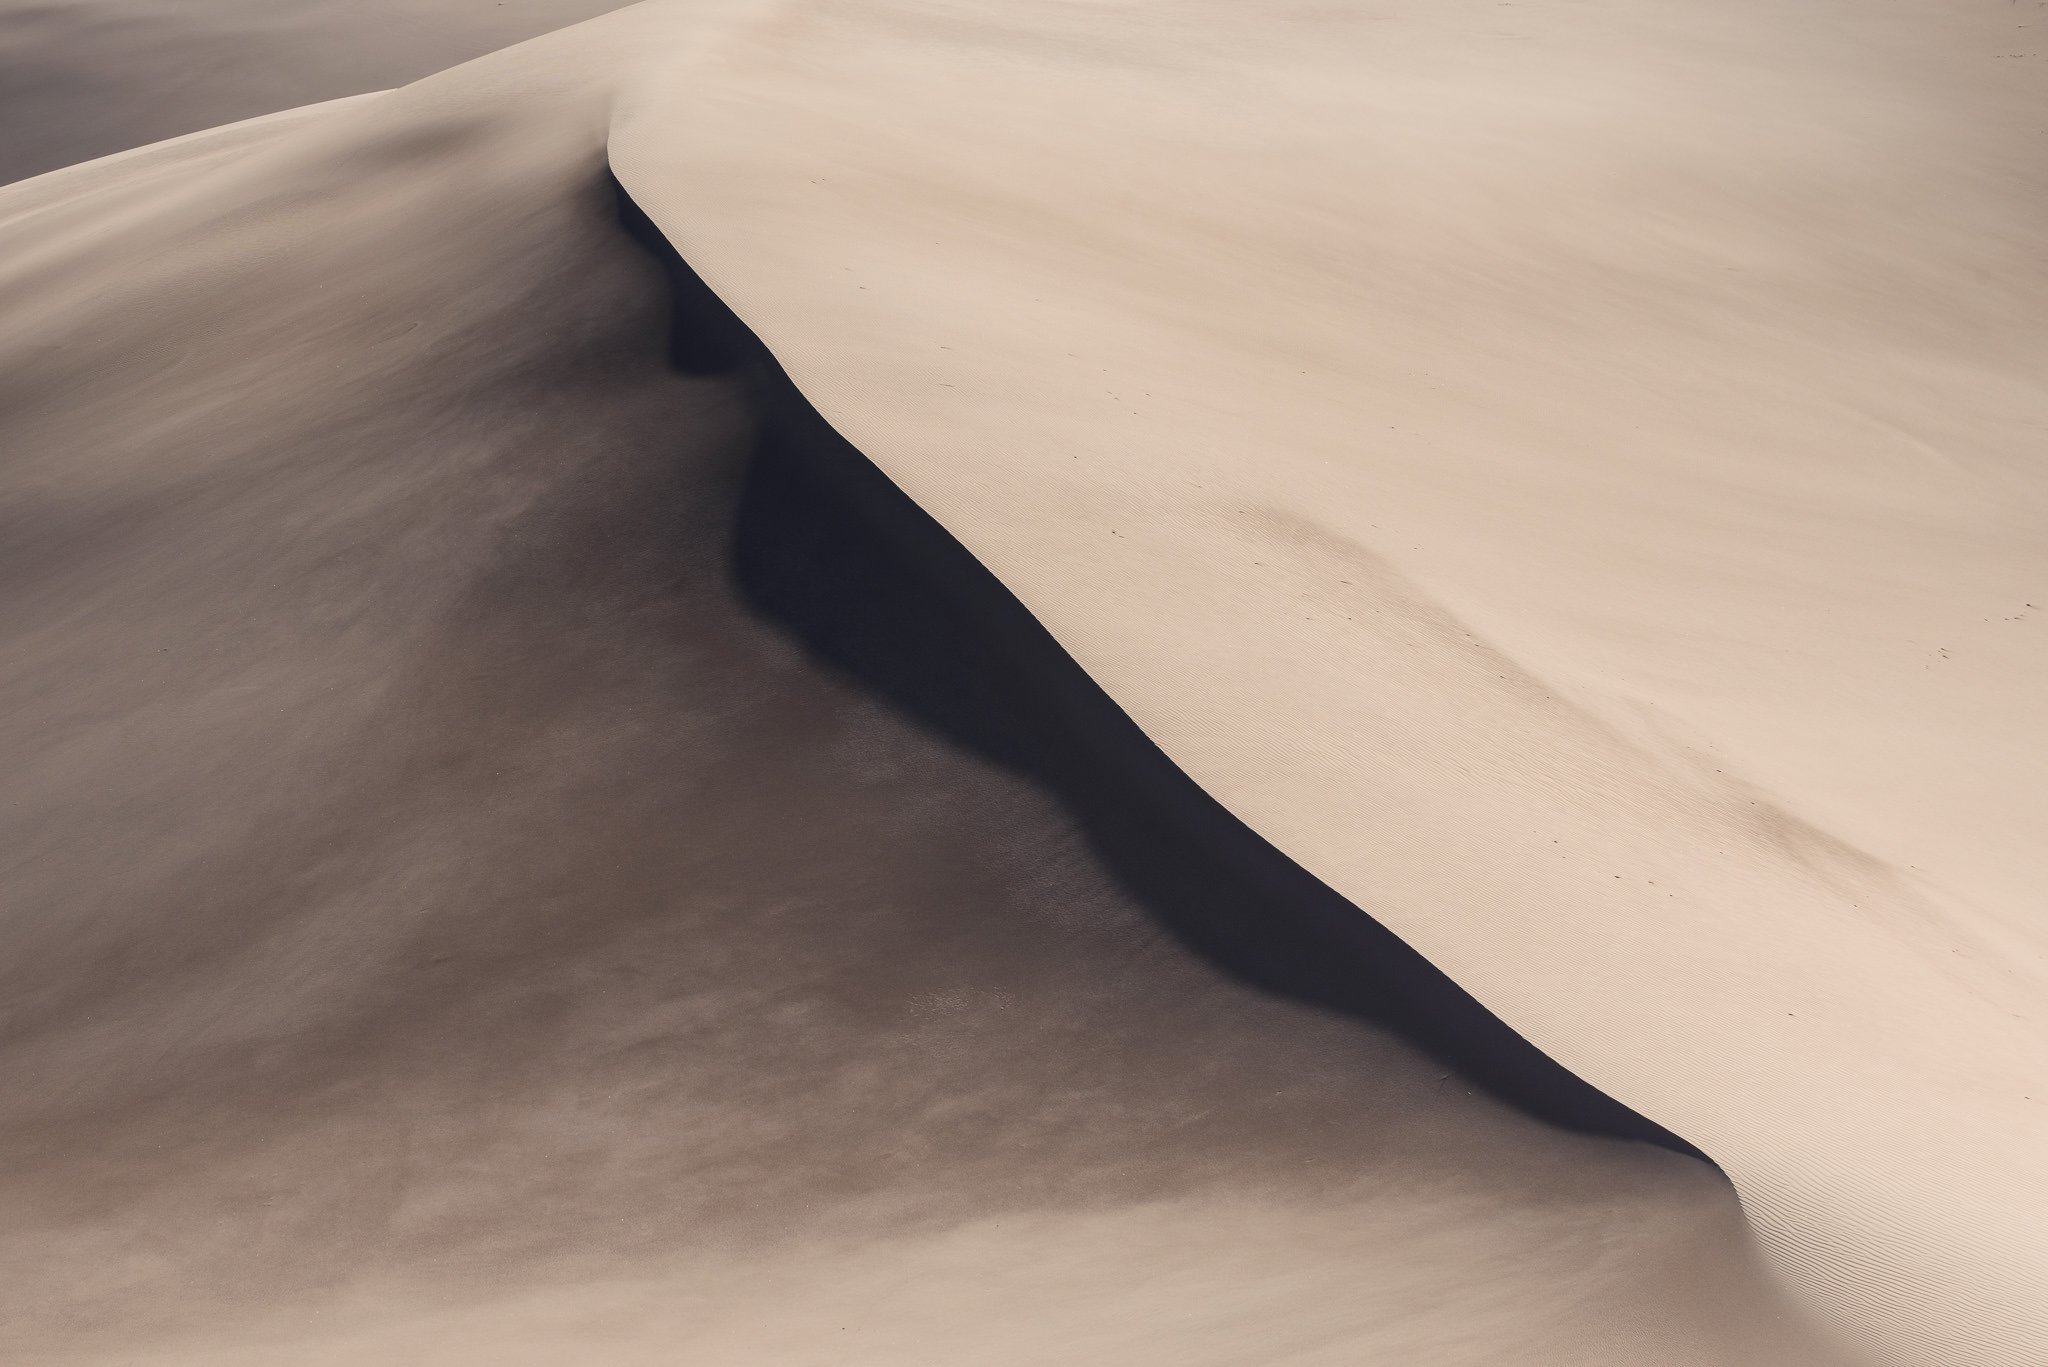 Sand Dunes: Lessons for Photographing One of Nature's Most Dynamic